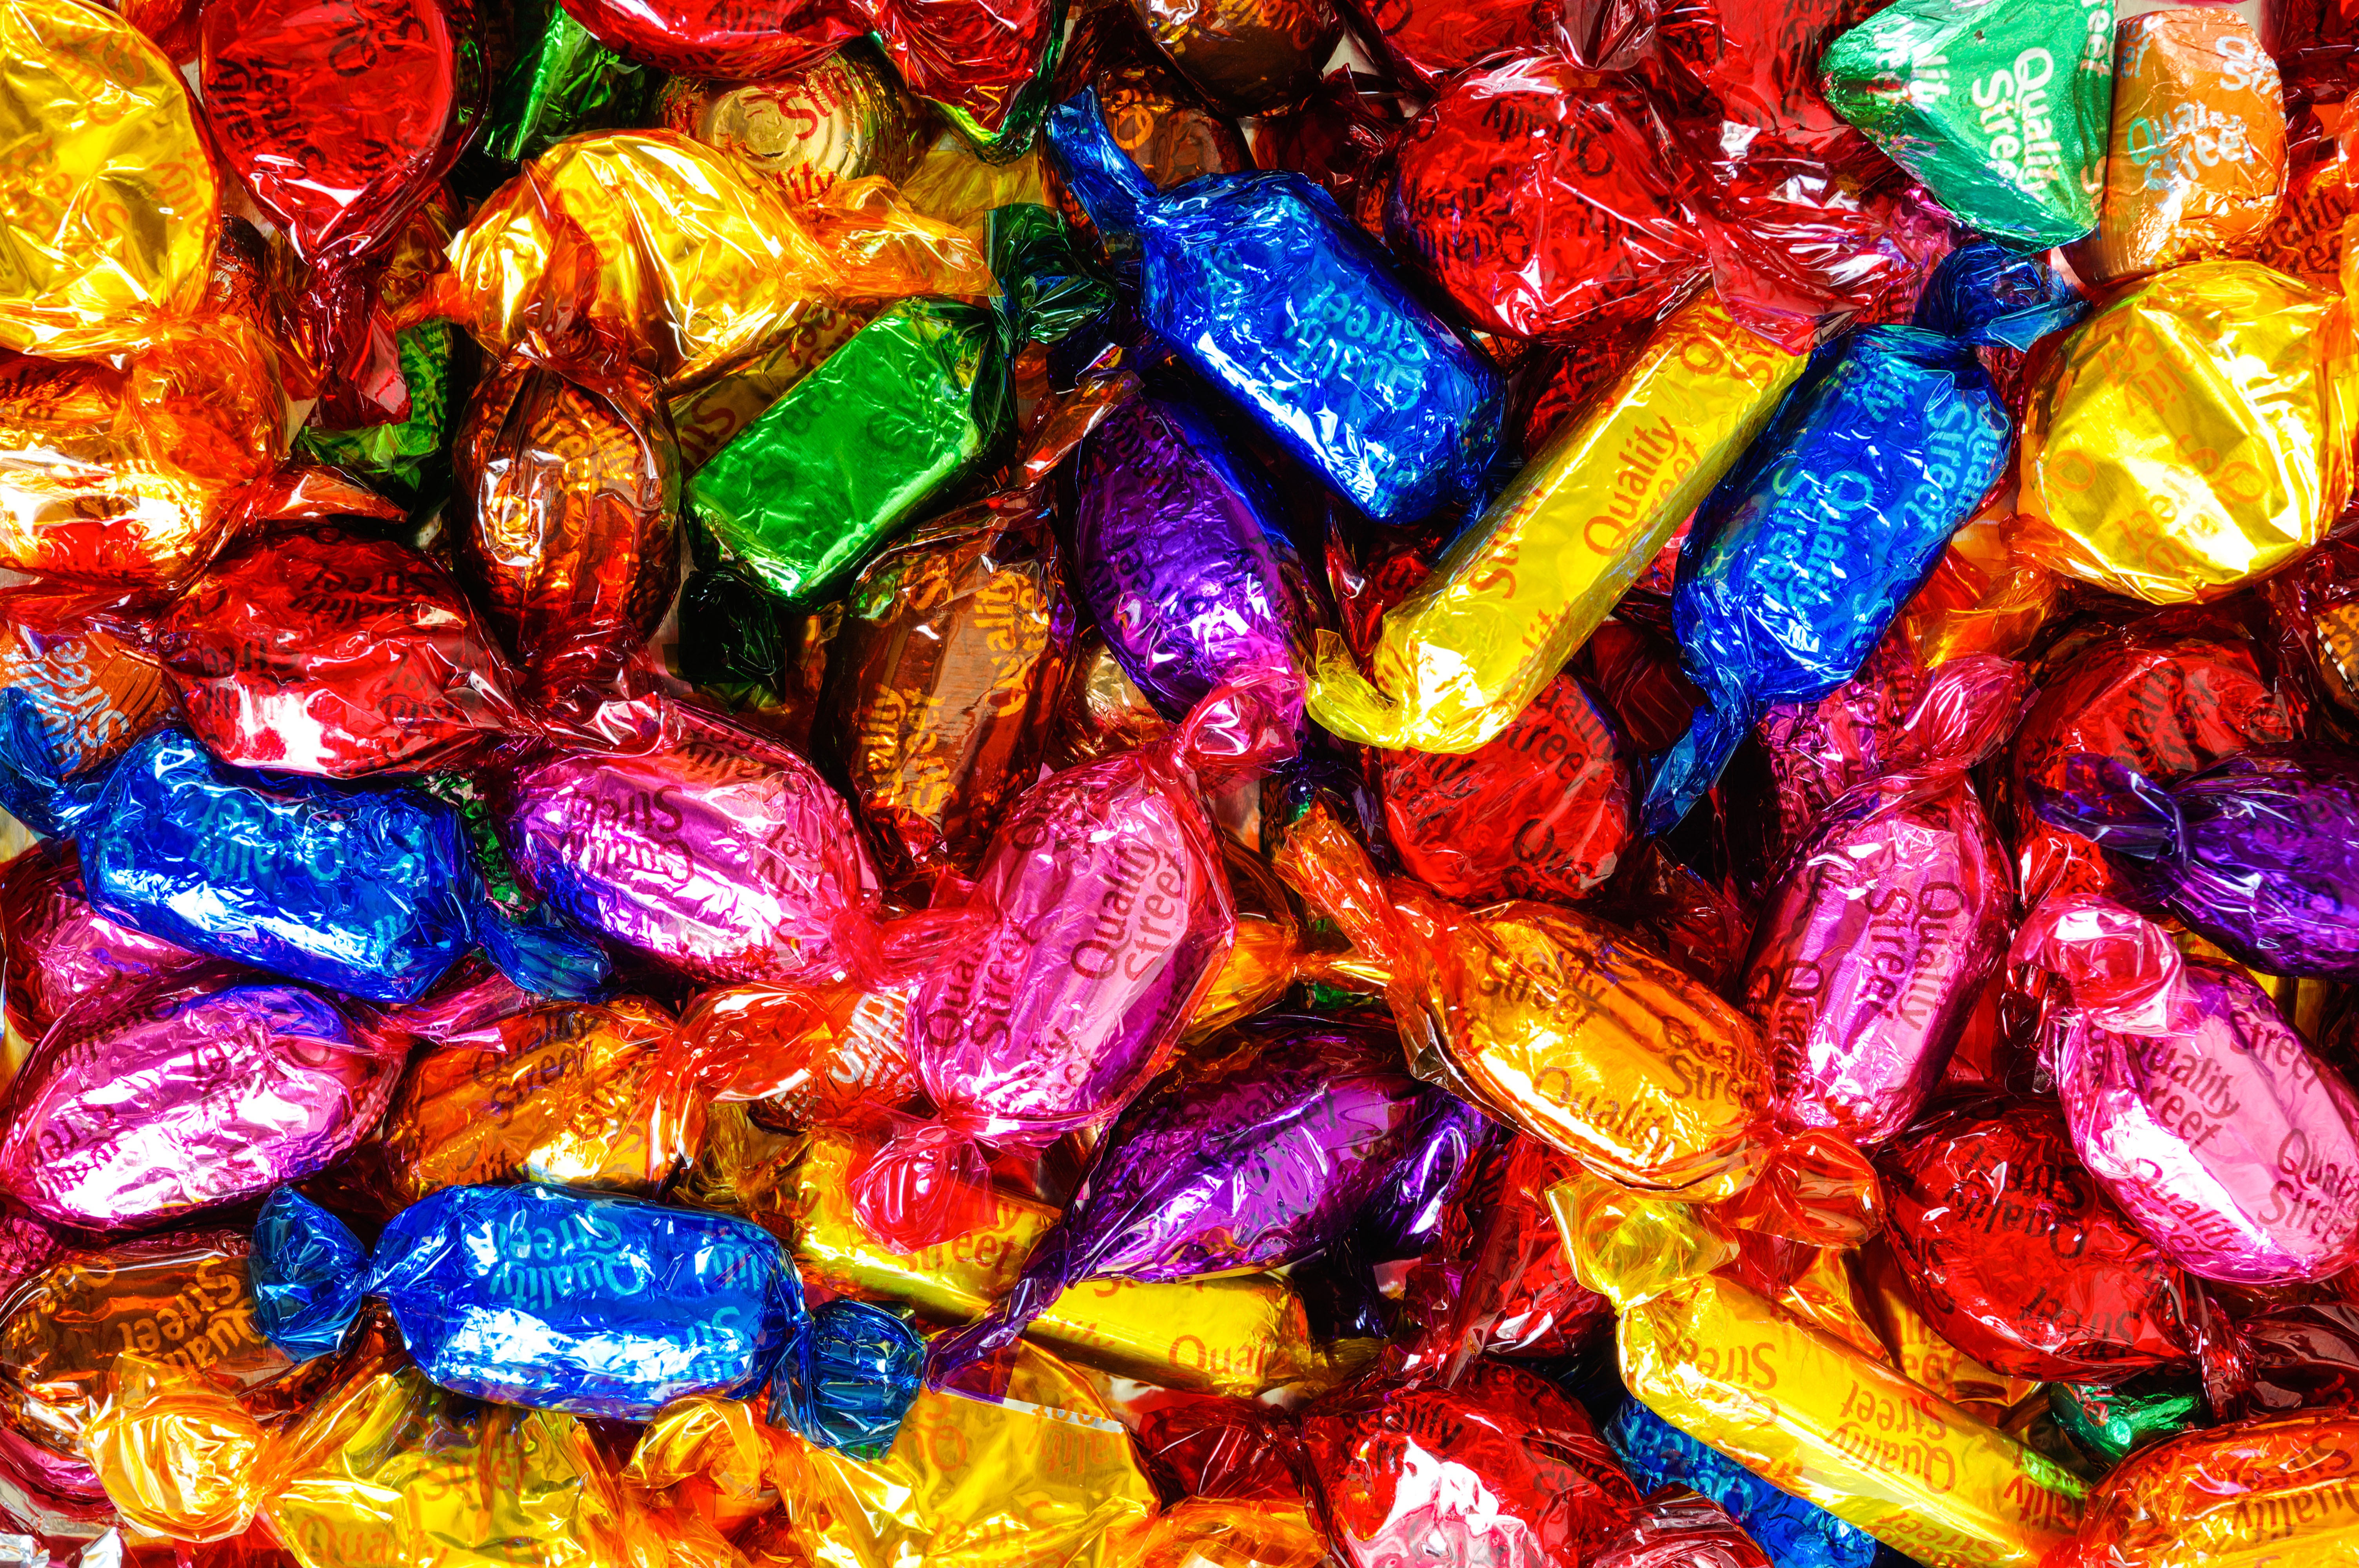 Quality Street is shaking things up this Christmas